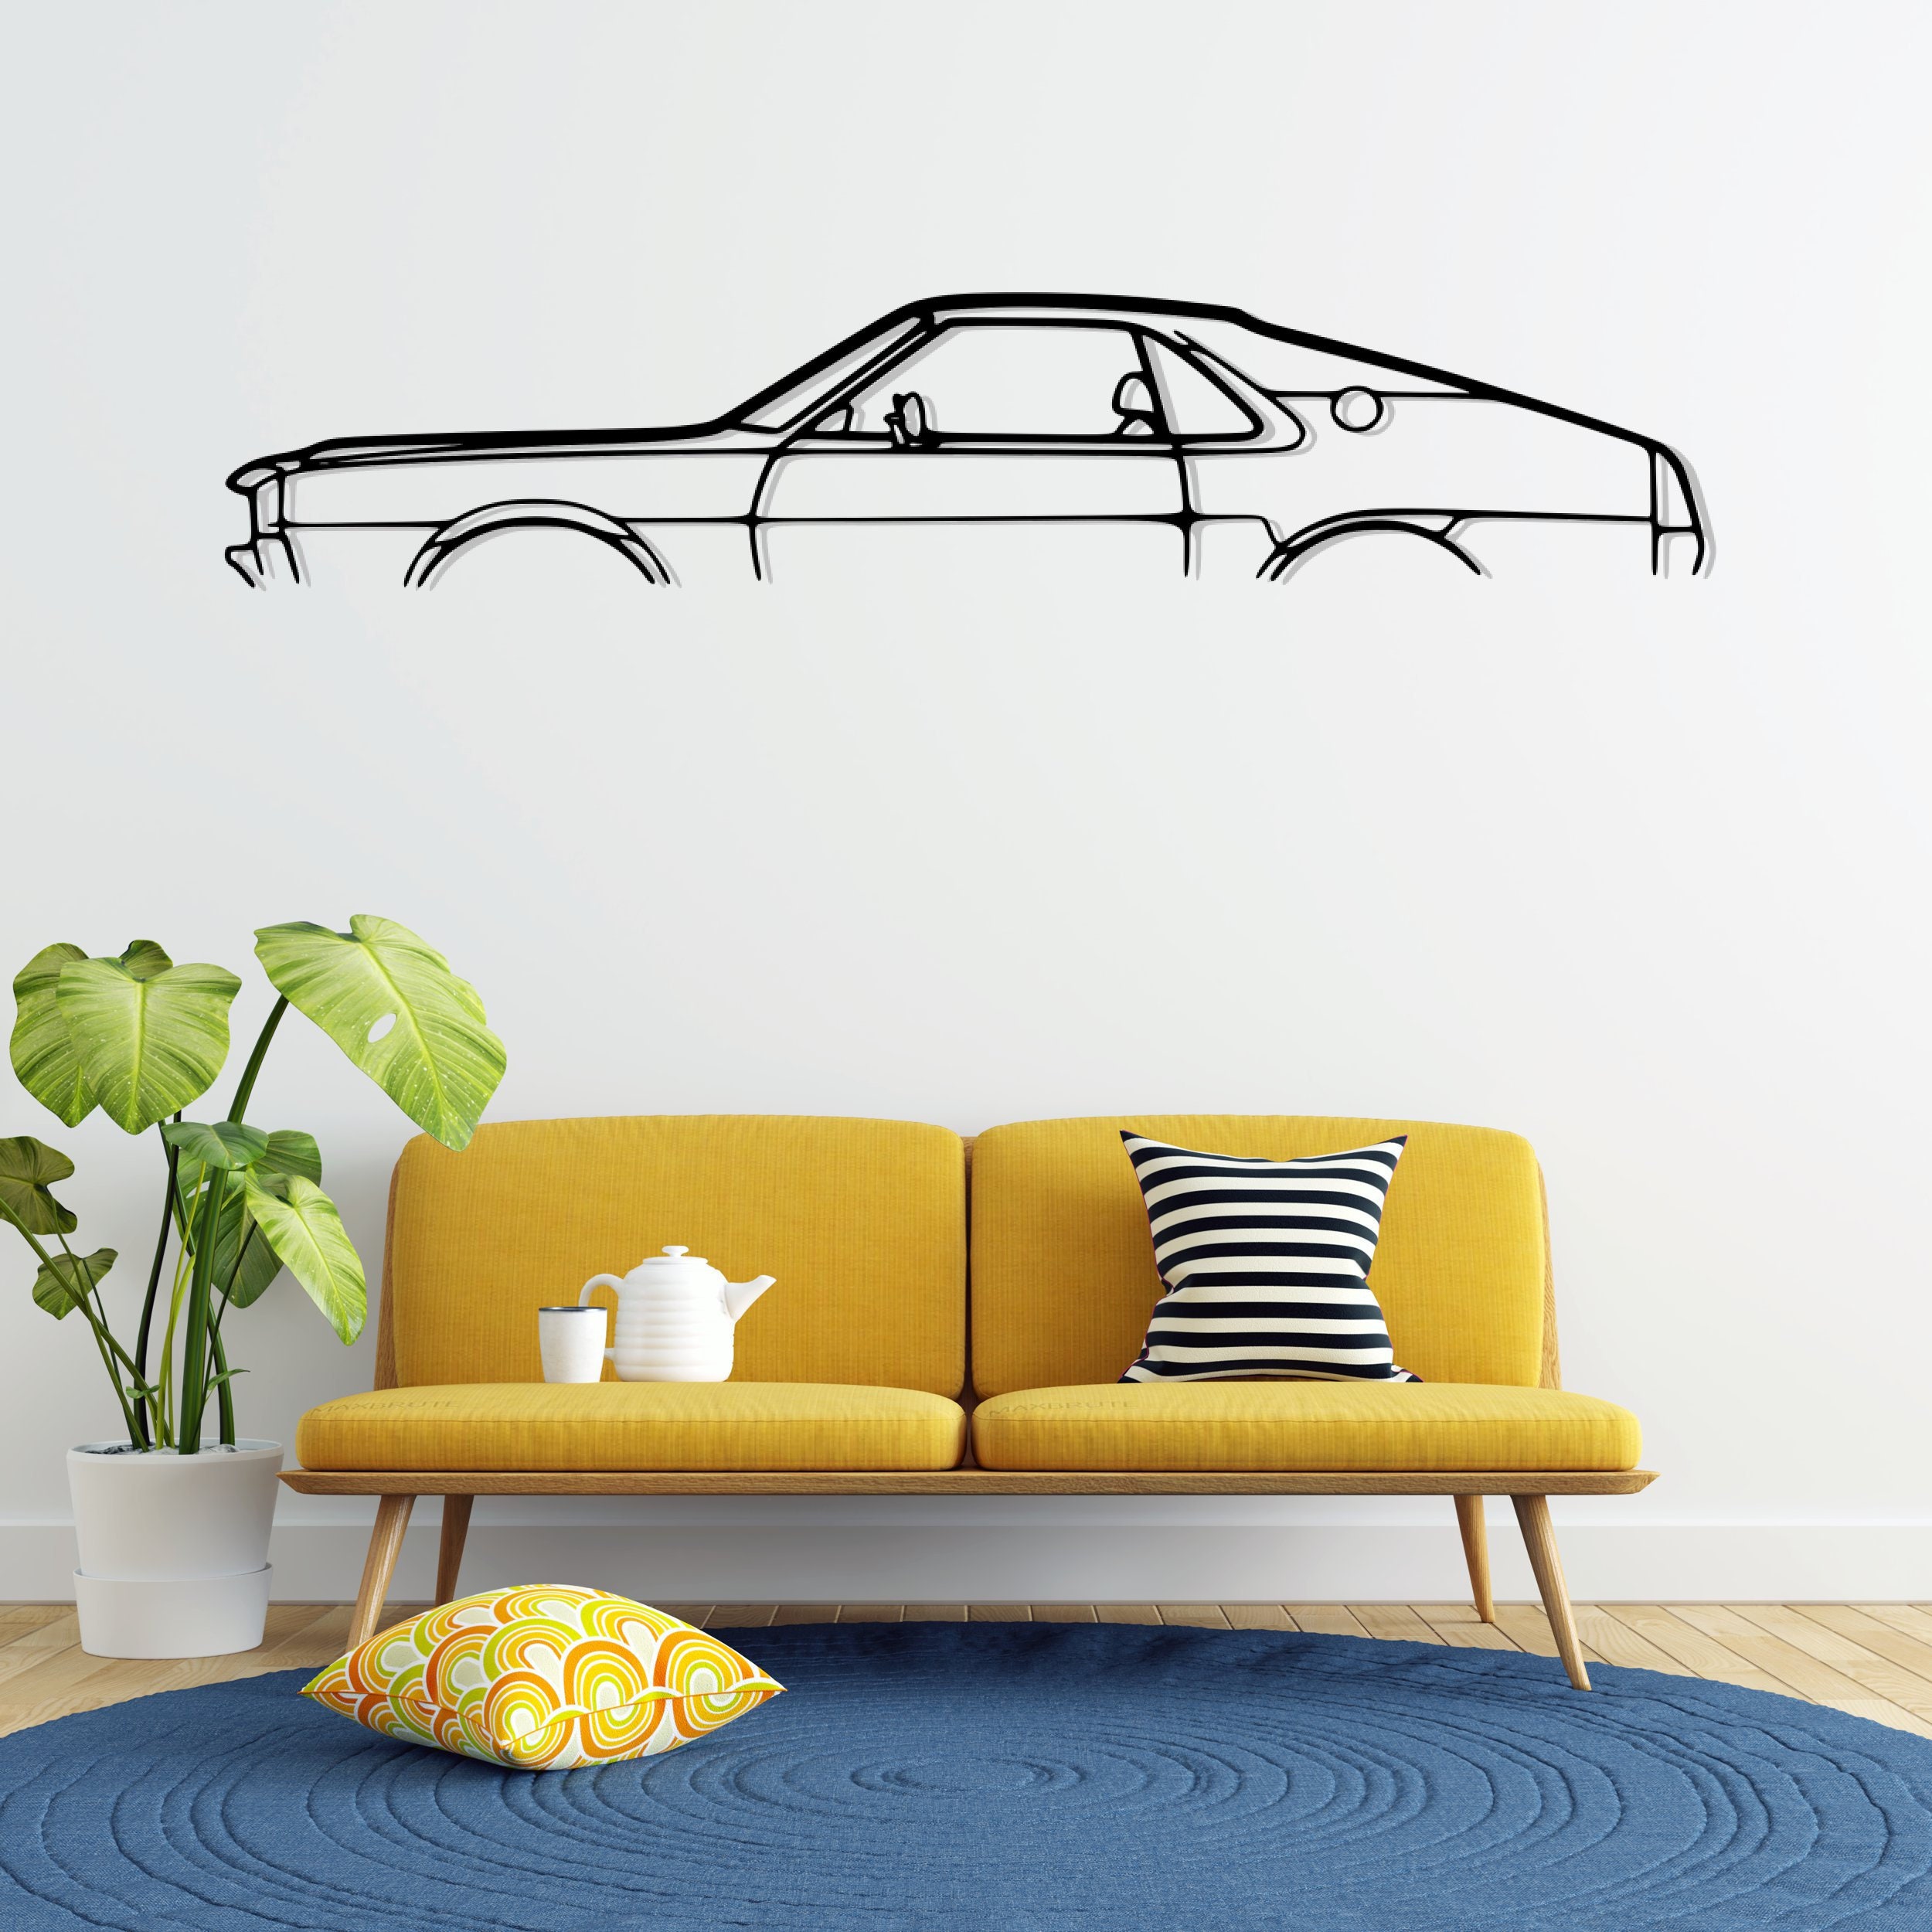 Best Gifts for Car Lovers - Finding Time To Fly  Boyfriend gifts, Car  lover, Best boyfriend gifts